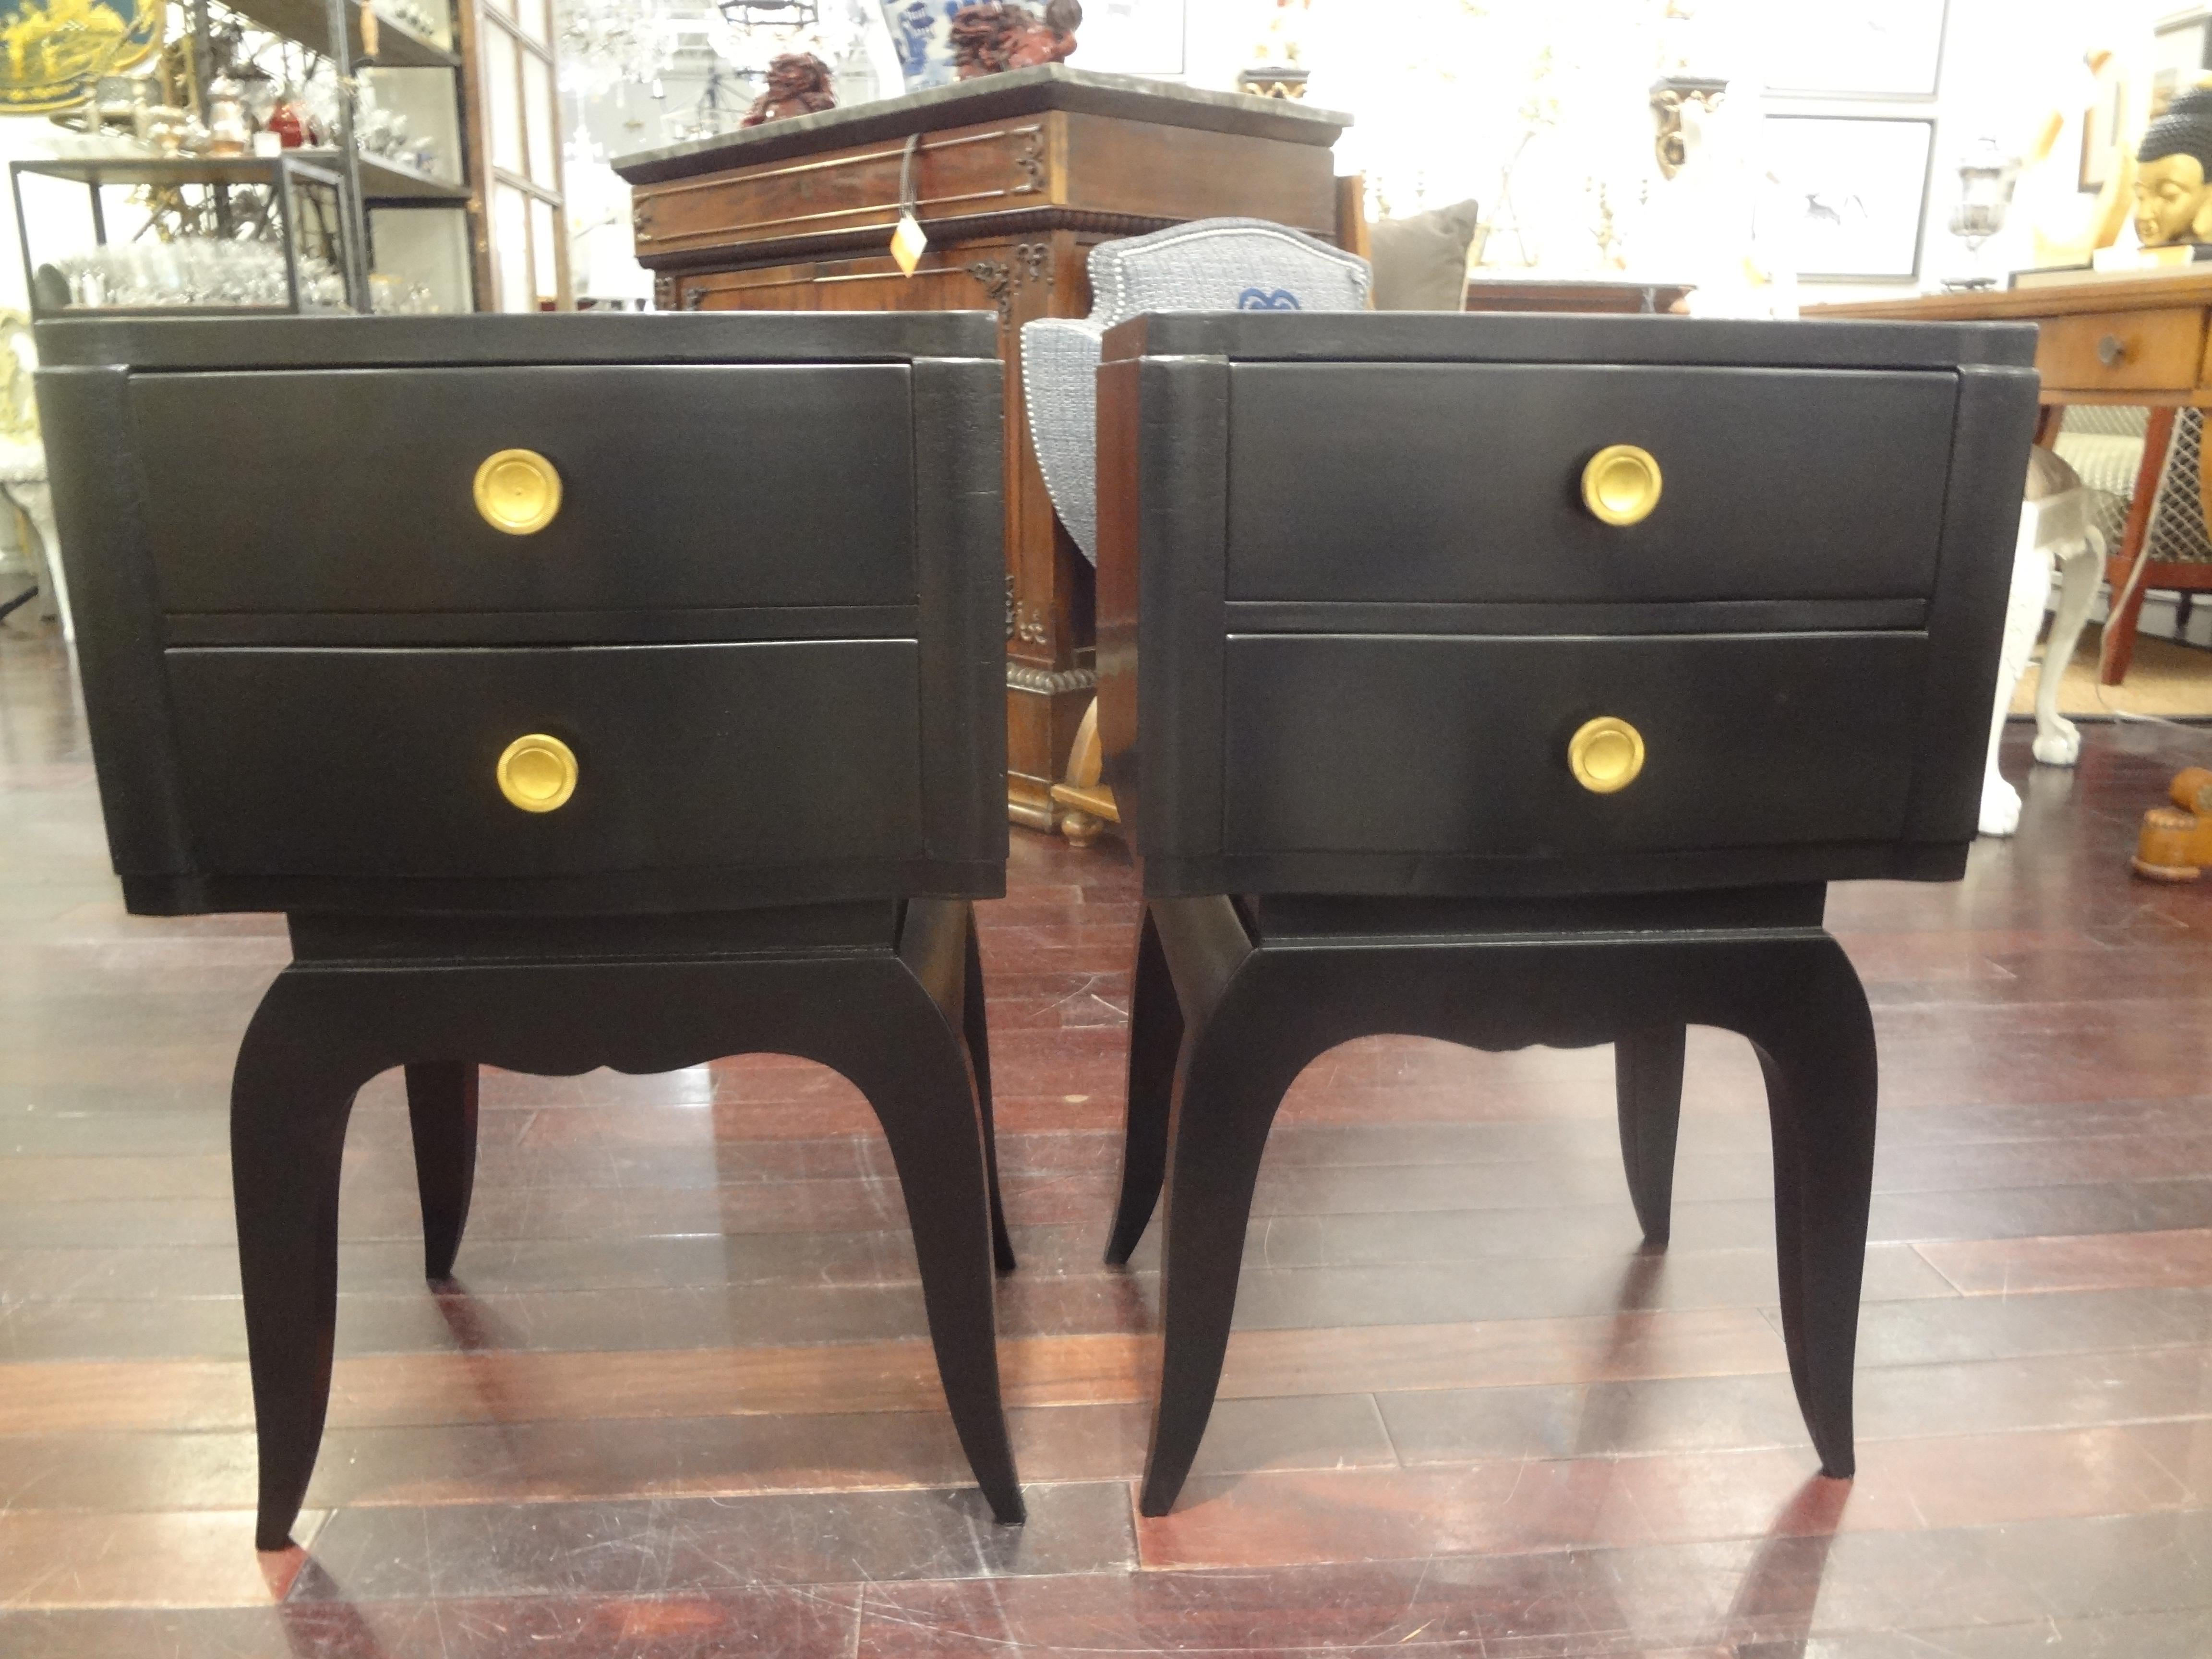 Stunning pair of French Art Deco ebonized commodes, chests, nightstands or side tables with two drawers and bronze hardware. This versatile pair of Jules Leleu inspired tables would work well in a variety of interiors and rooms and date to the 1930s.